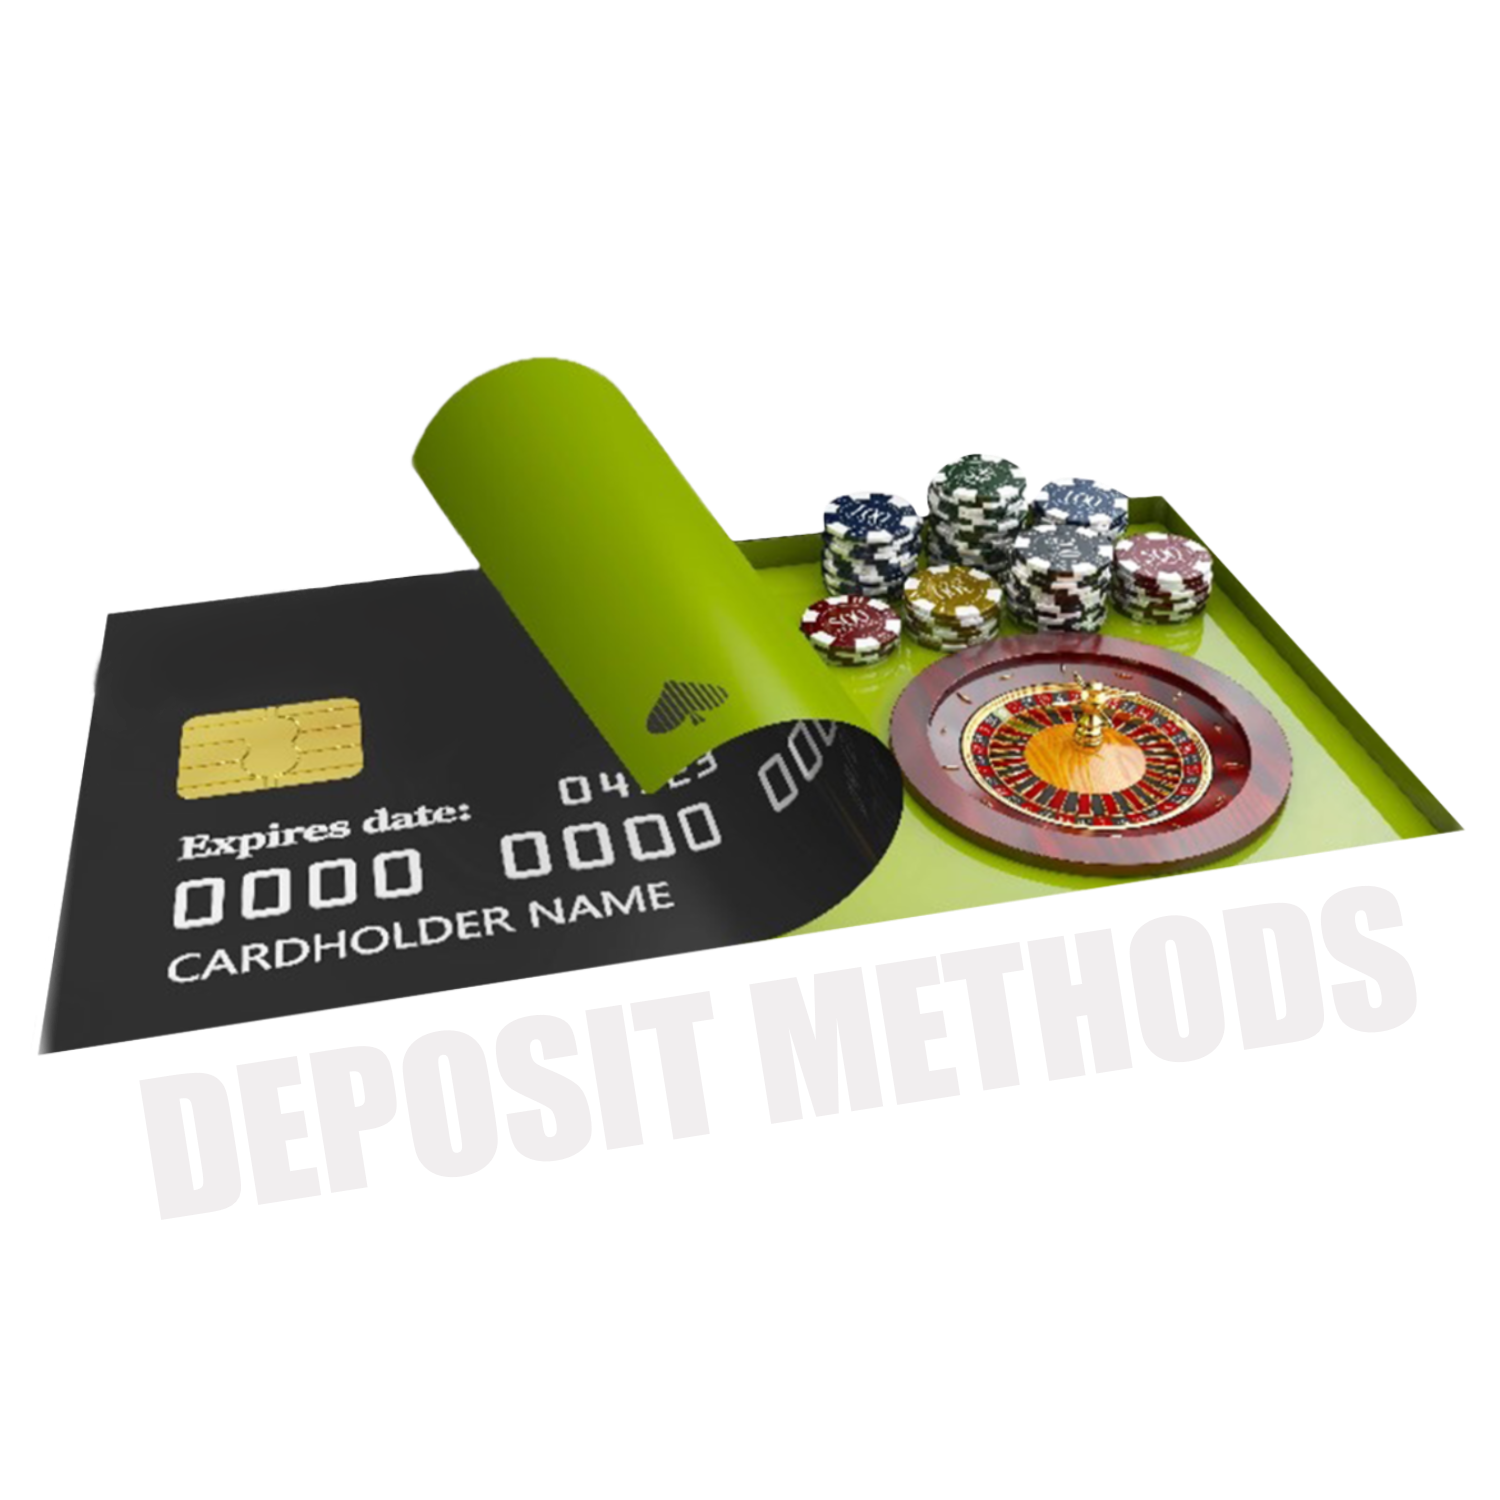 Read more about deposit methods for online casinos that are available in India.